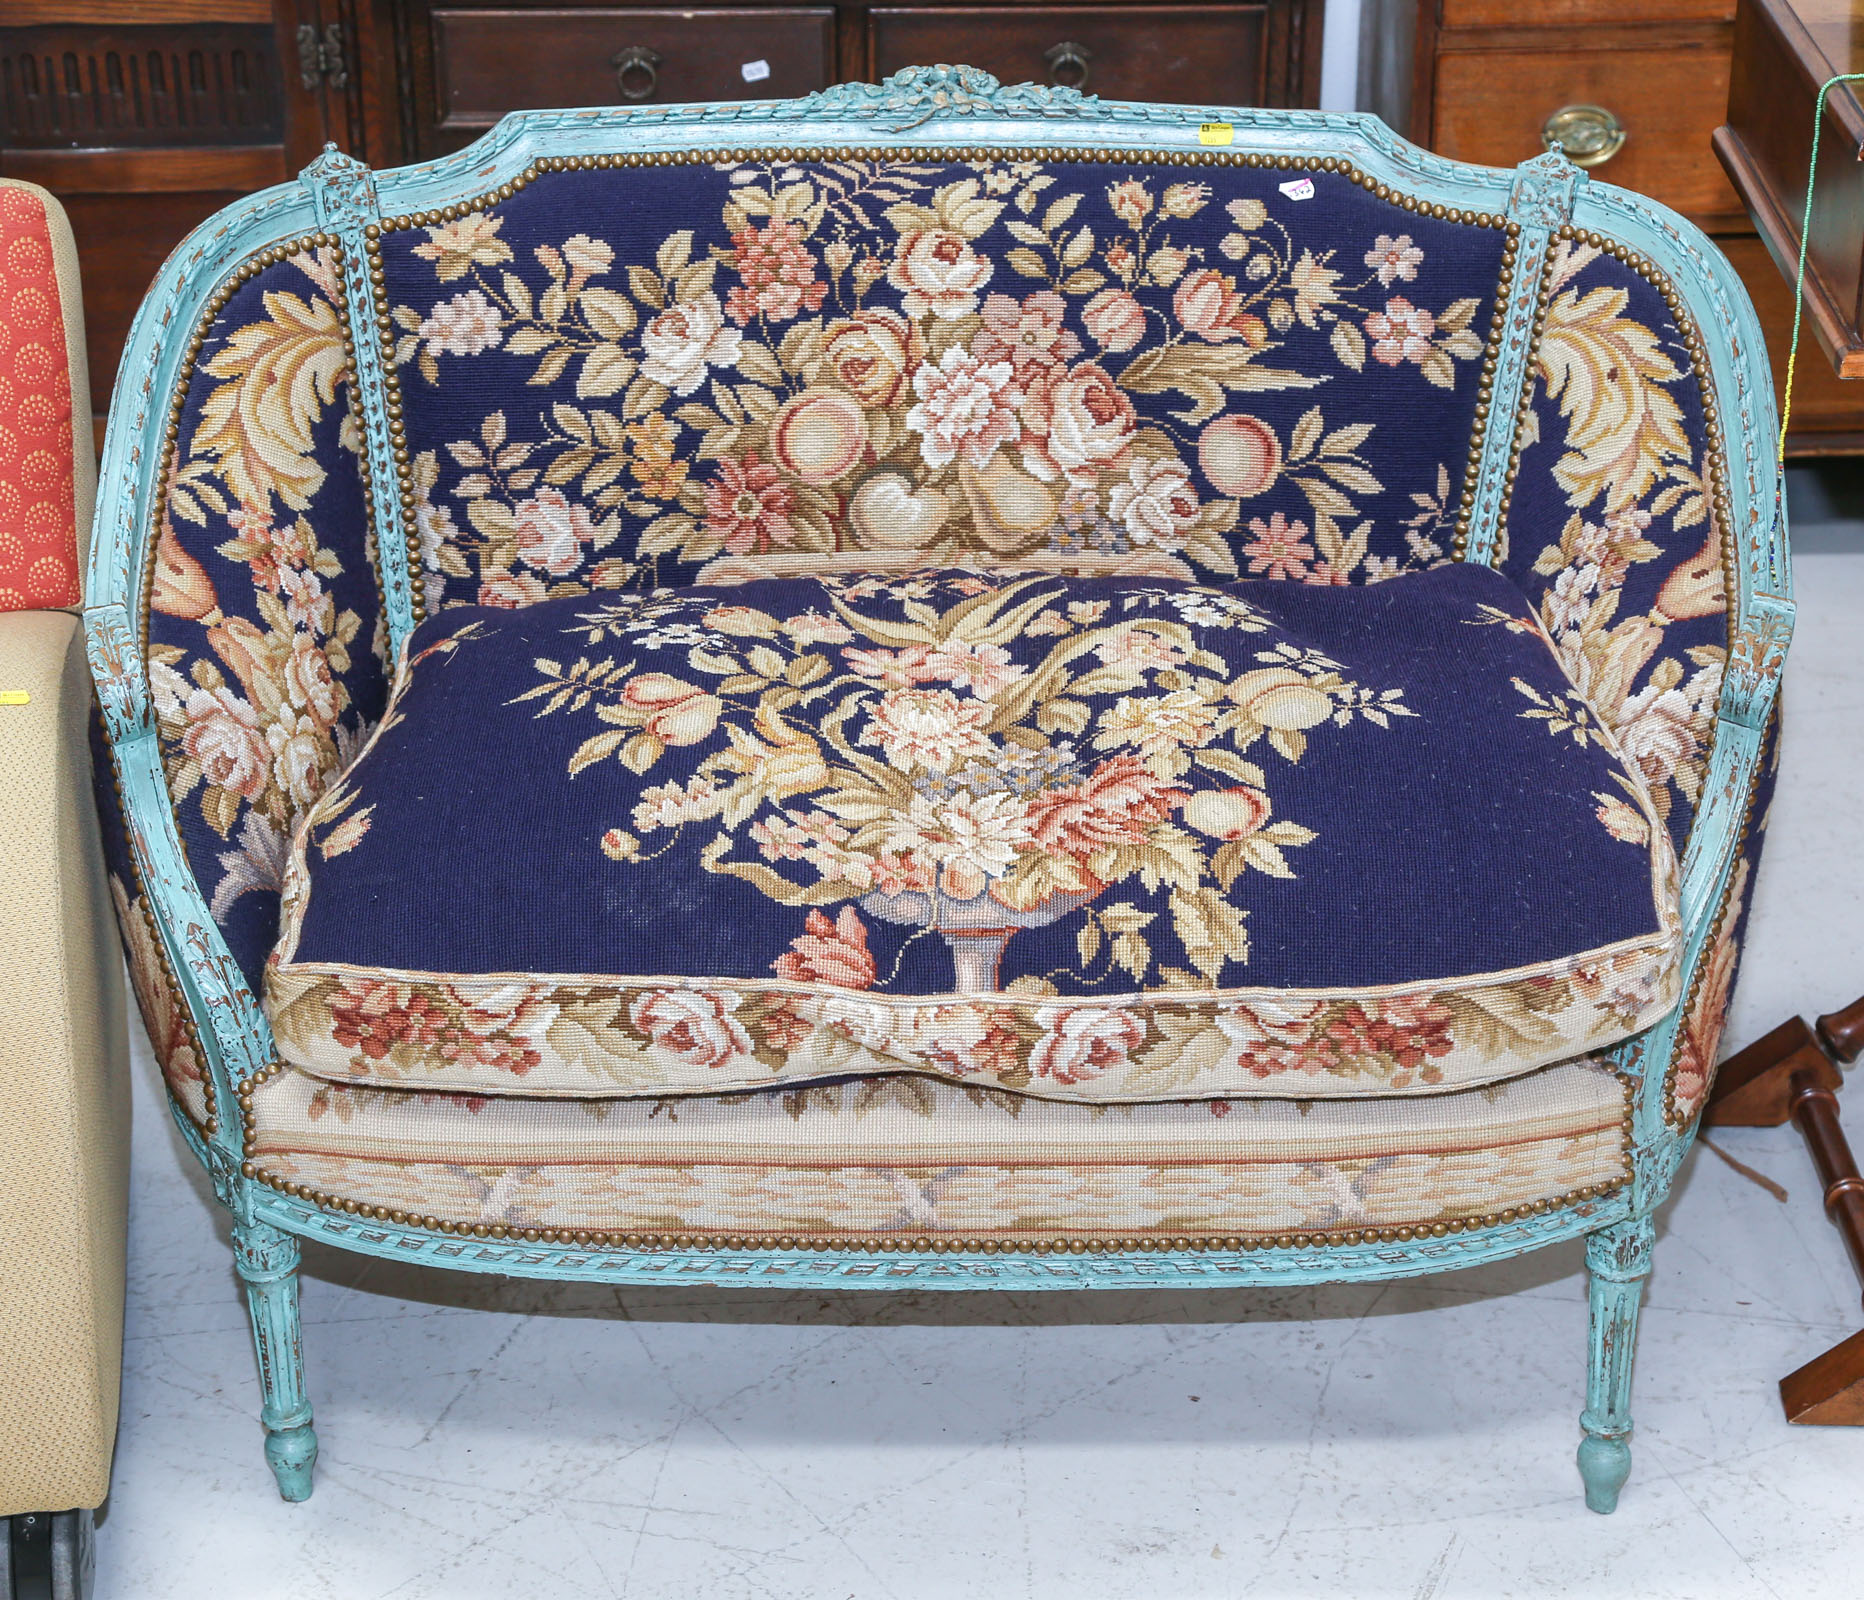 LOUIS XV STYLE CARVED WOOD SETTEE 2e971c